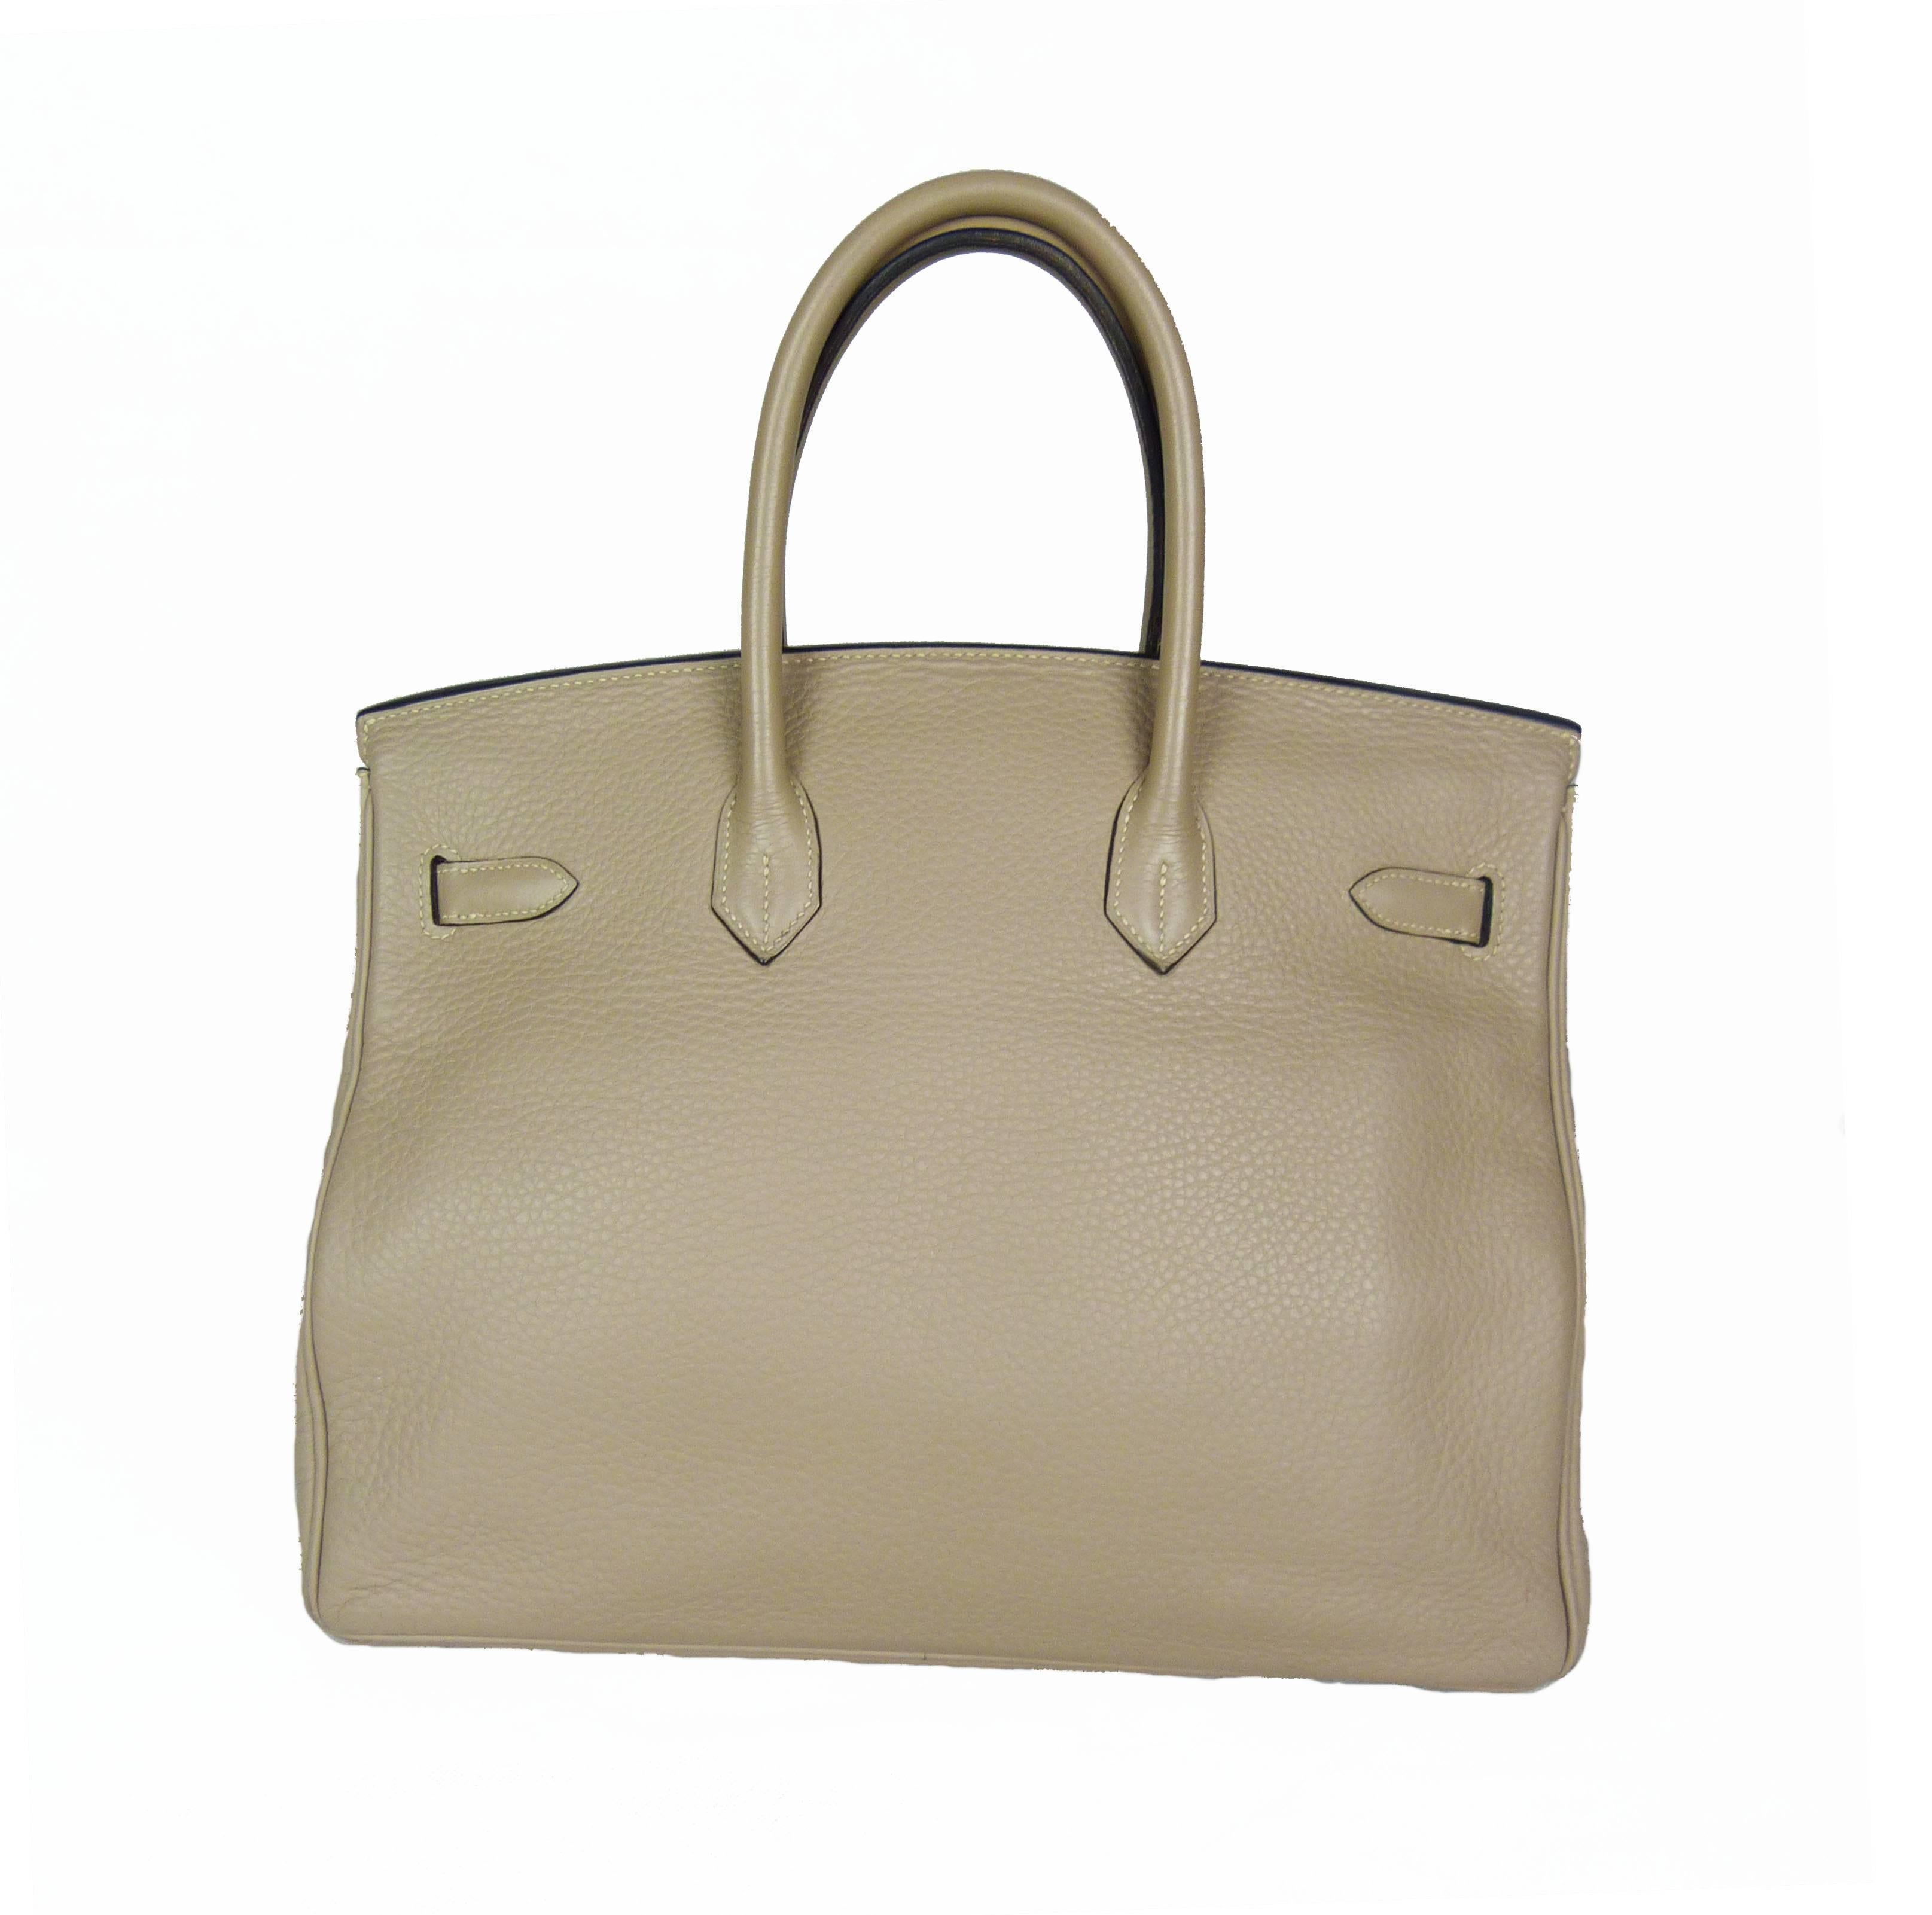 Hermès Birkin 35Cm Gris Tourterelle Clémence,
The bag comes in a beautiful and unique Grey Tourterelle and is finished with silver hardware. 

Year 2003. 
This bag comes with lock, keys, clochette.
Good condition, 

States of corners :